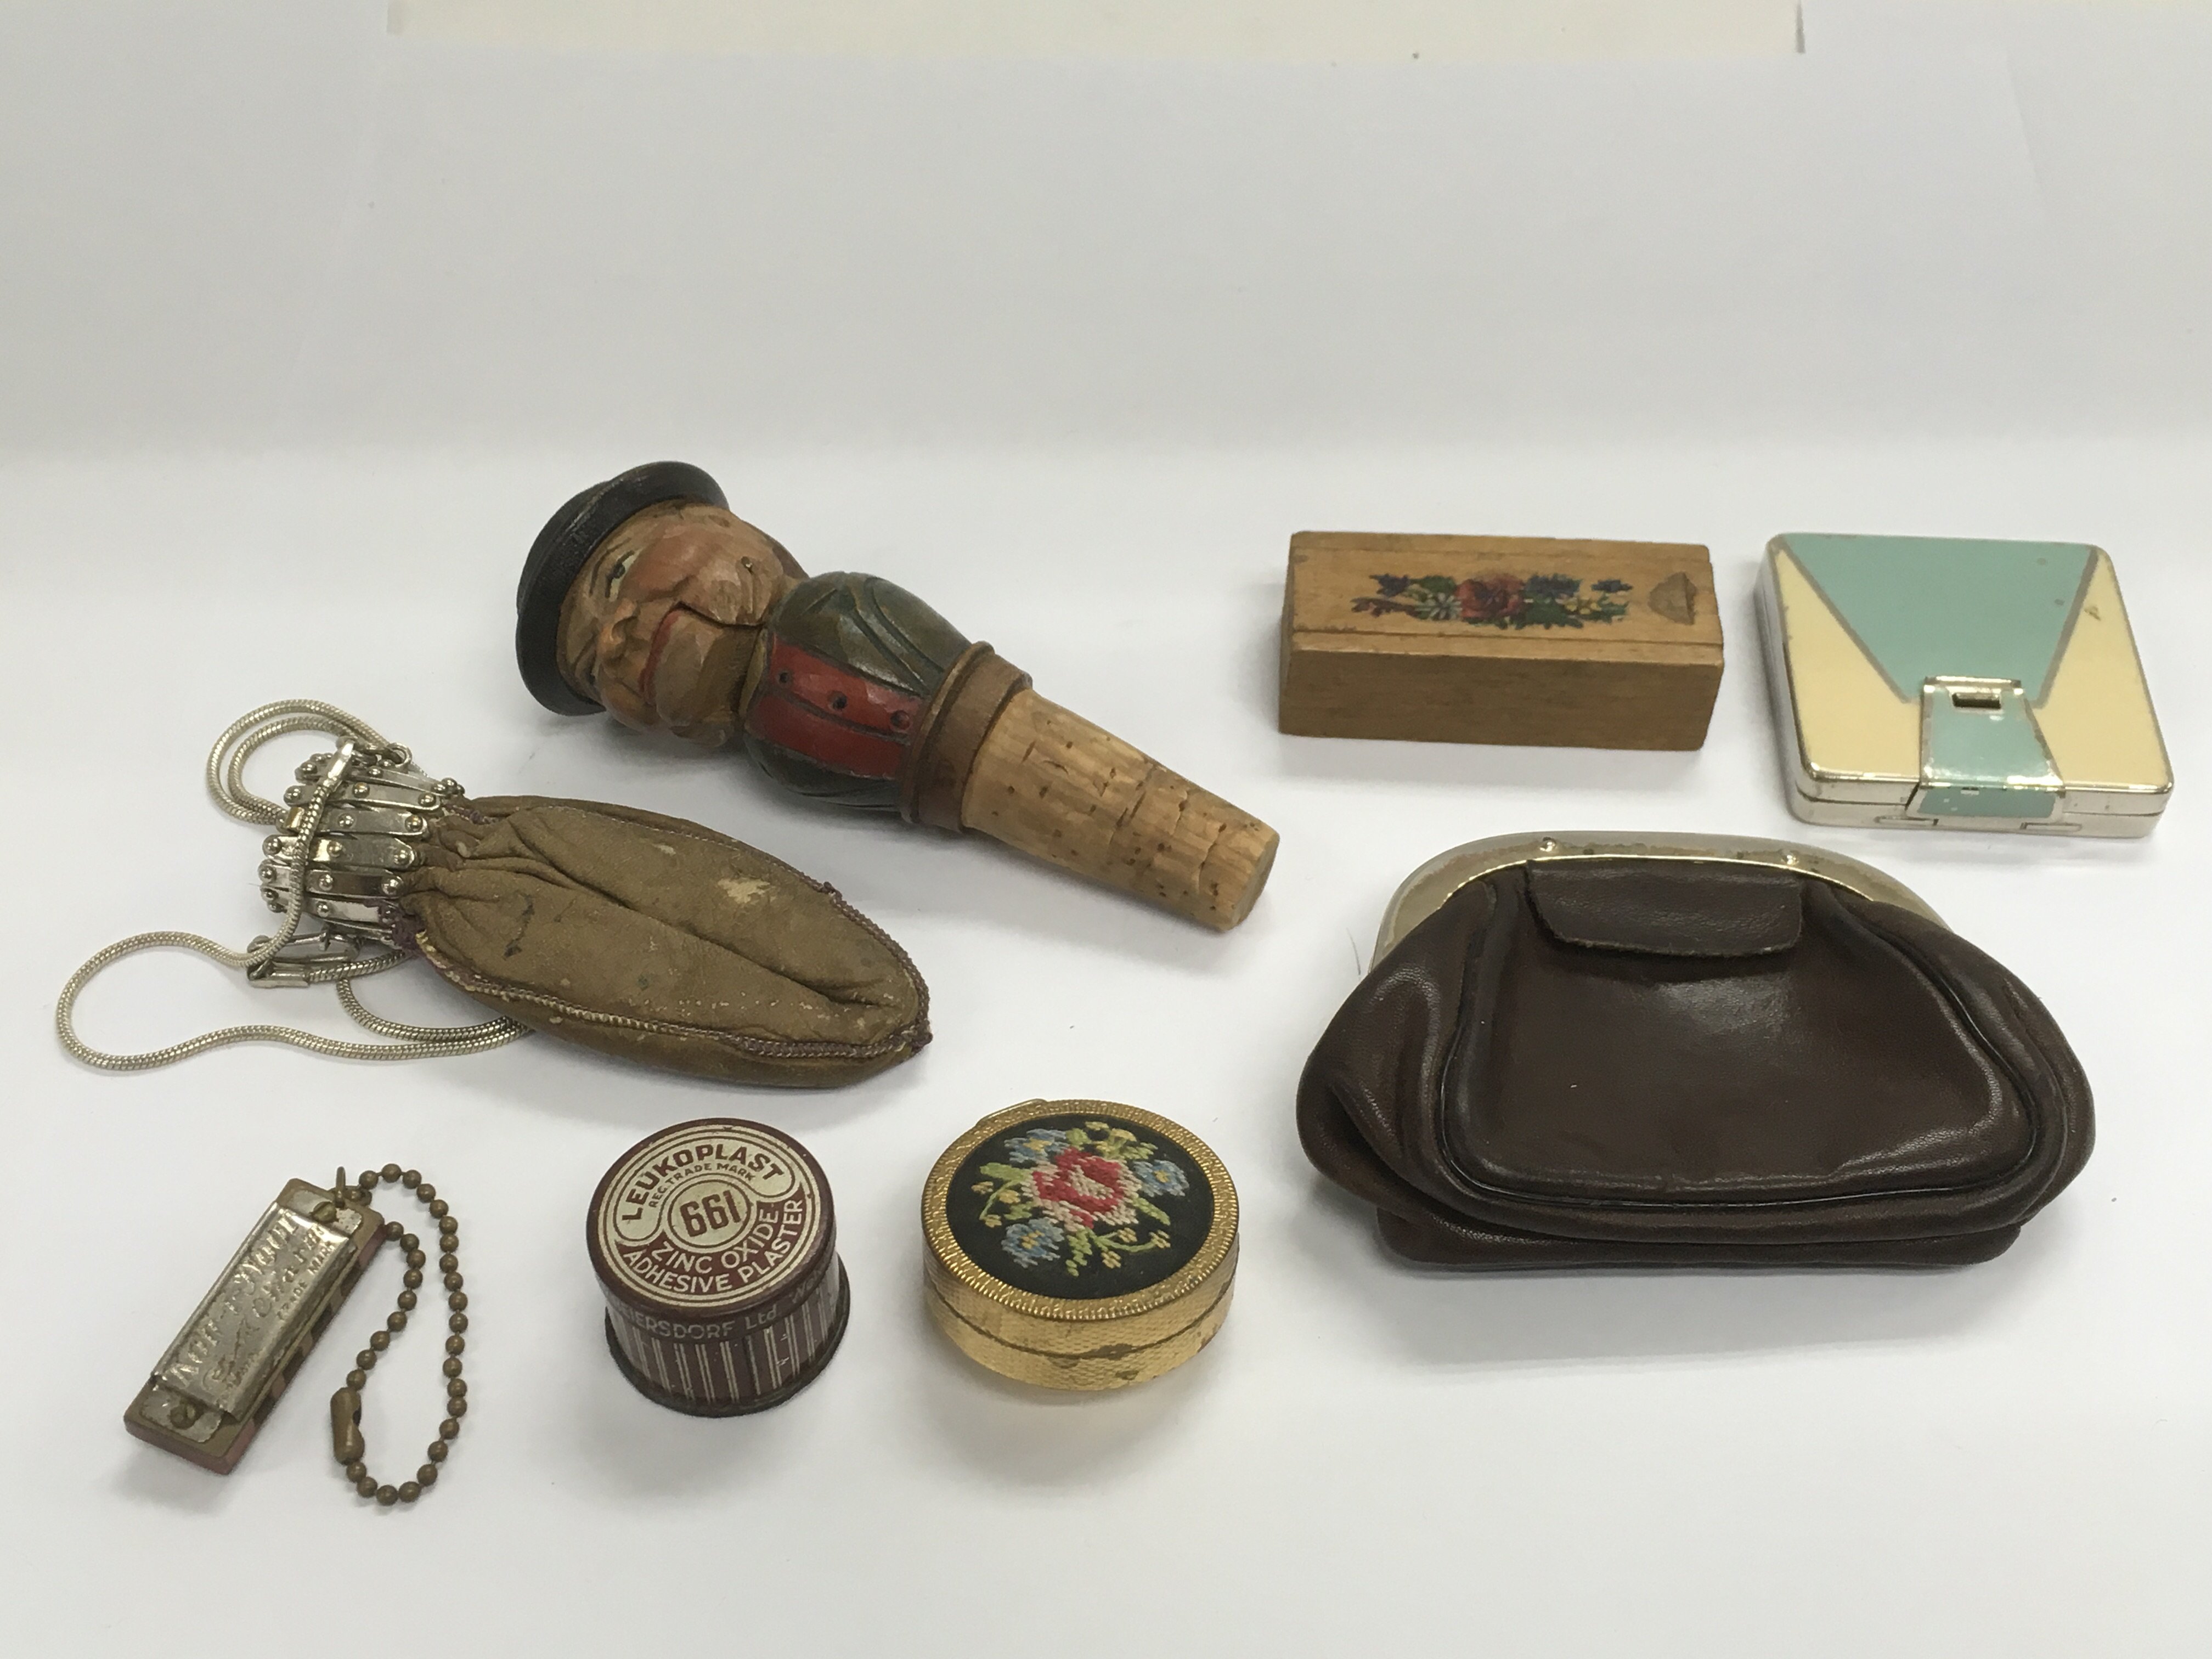 A collection of oddments including two coin purses